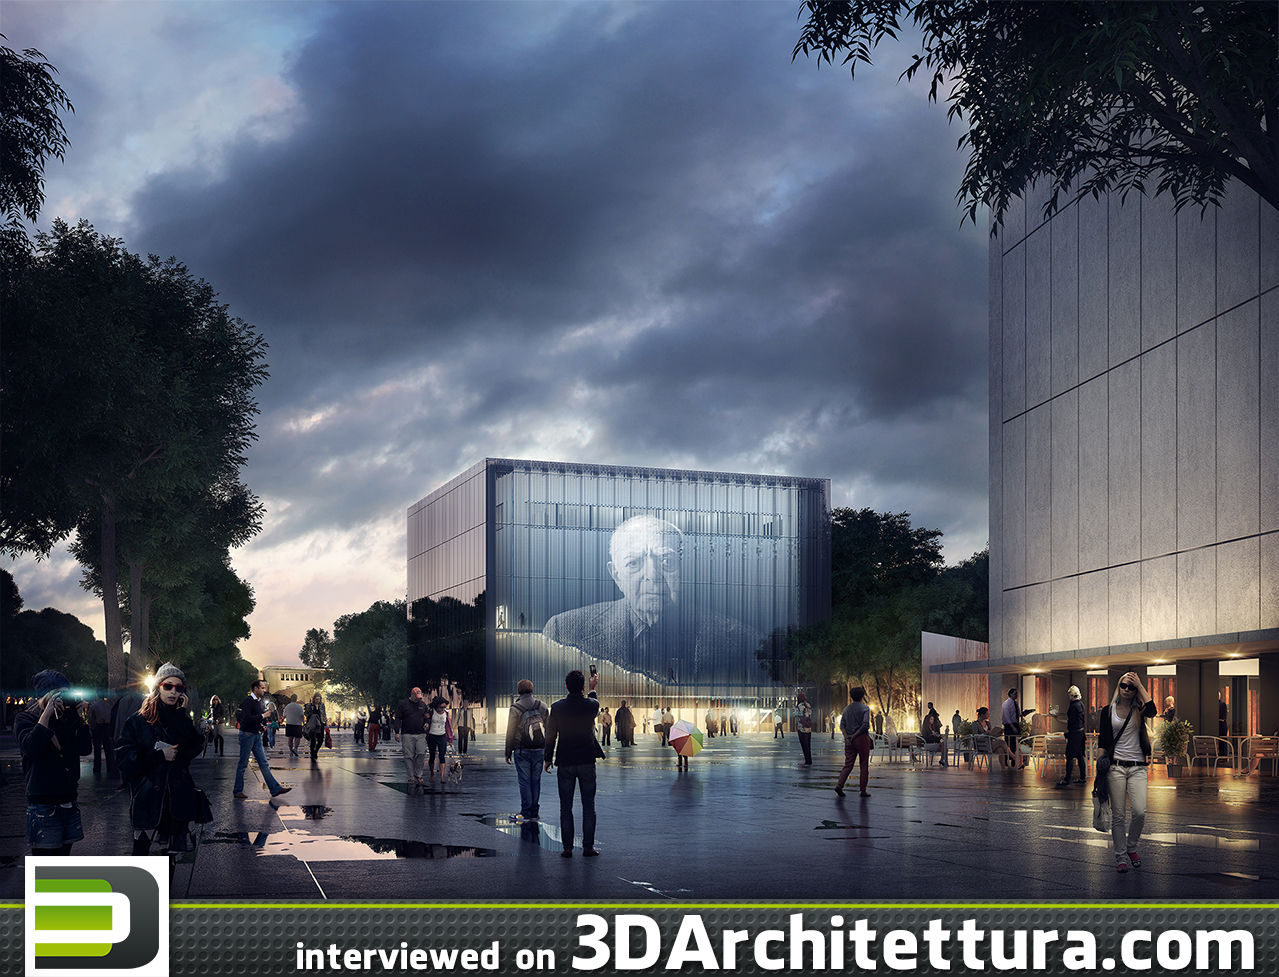 András Káldos , CEO at Brick Visual, Hungary, spoke to 3DArchitettura about artistic architectural visualizations and keeping up with technological progress